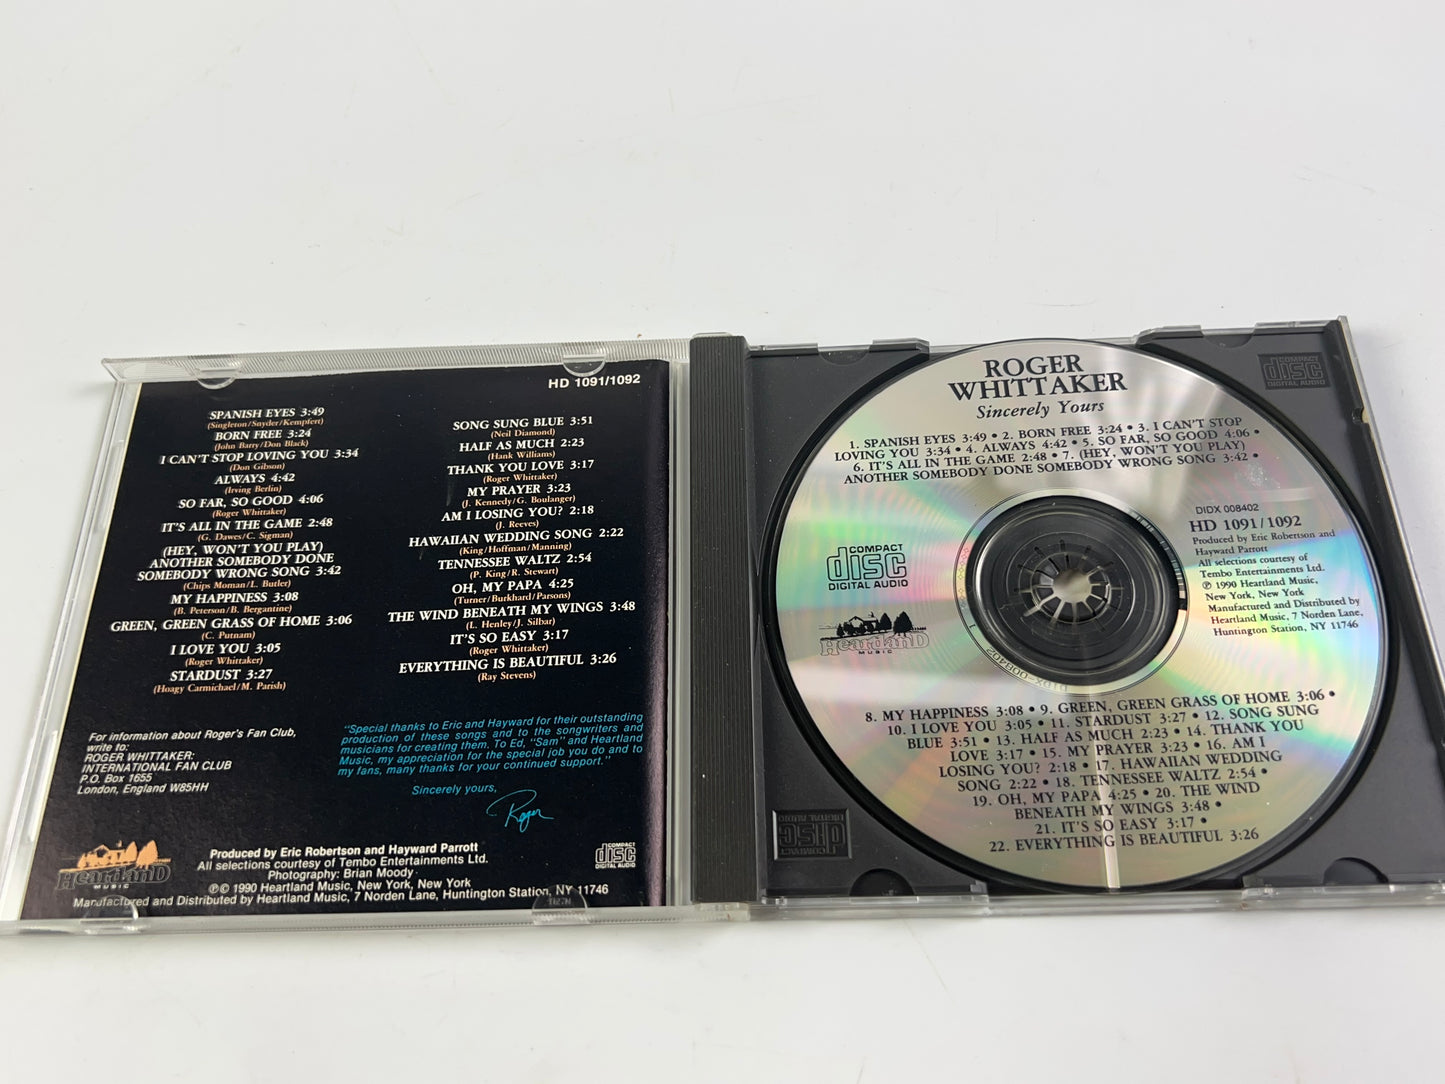 Sincerely Yours by Roger Whittaker - Music CD - Roger Whittaker